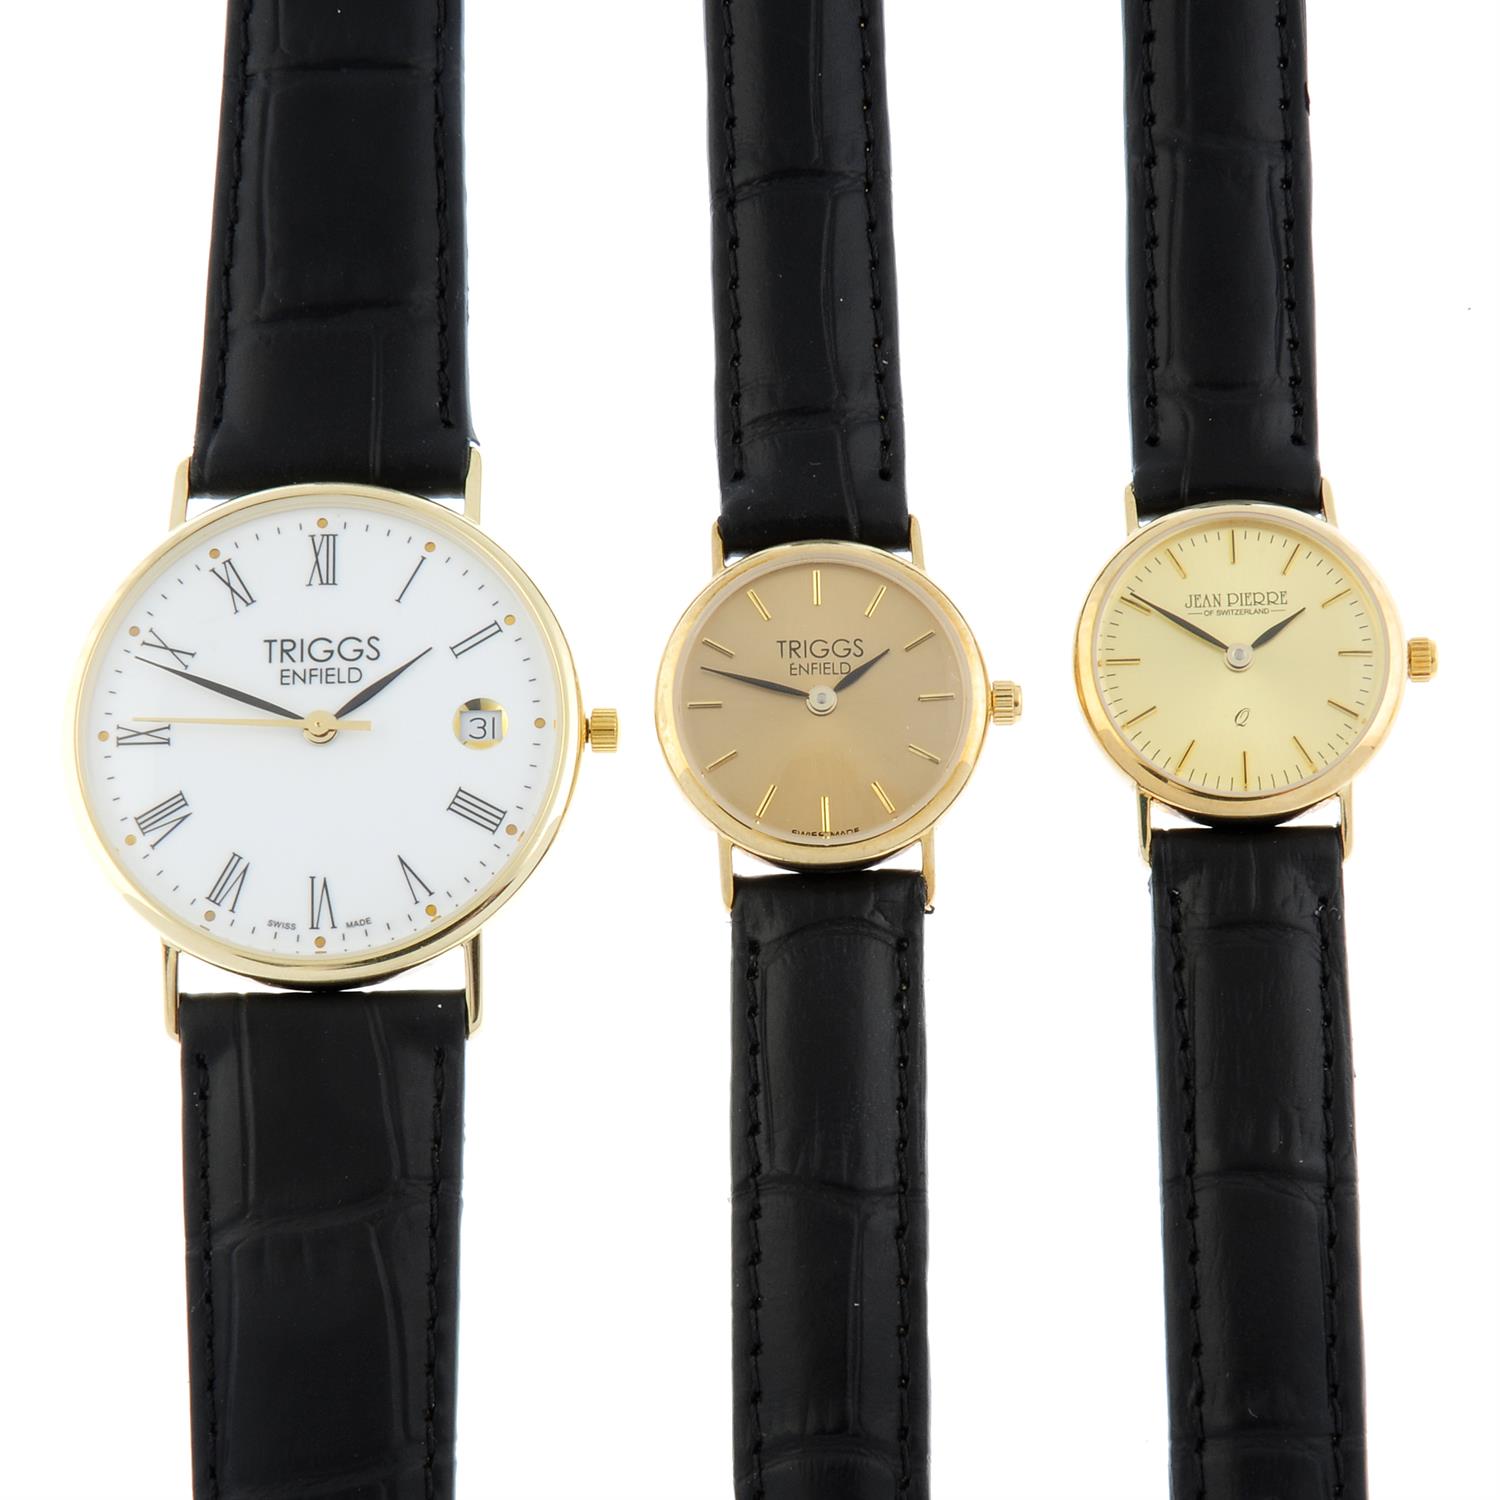 TRIGGS - a yellow metal wrist watch (33.5mm) with a 9ct gold Triggs wrist watch and a 9ct gold Jean